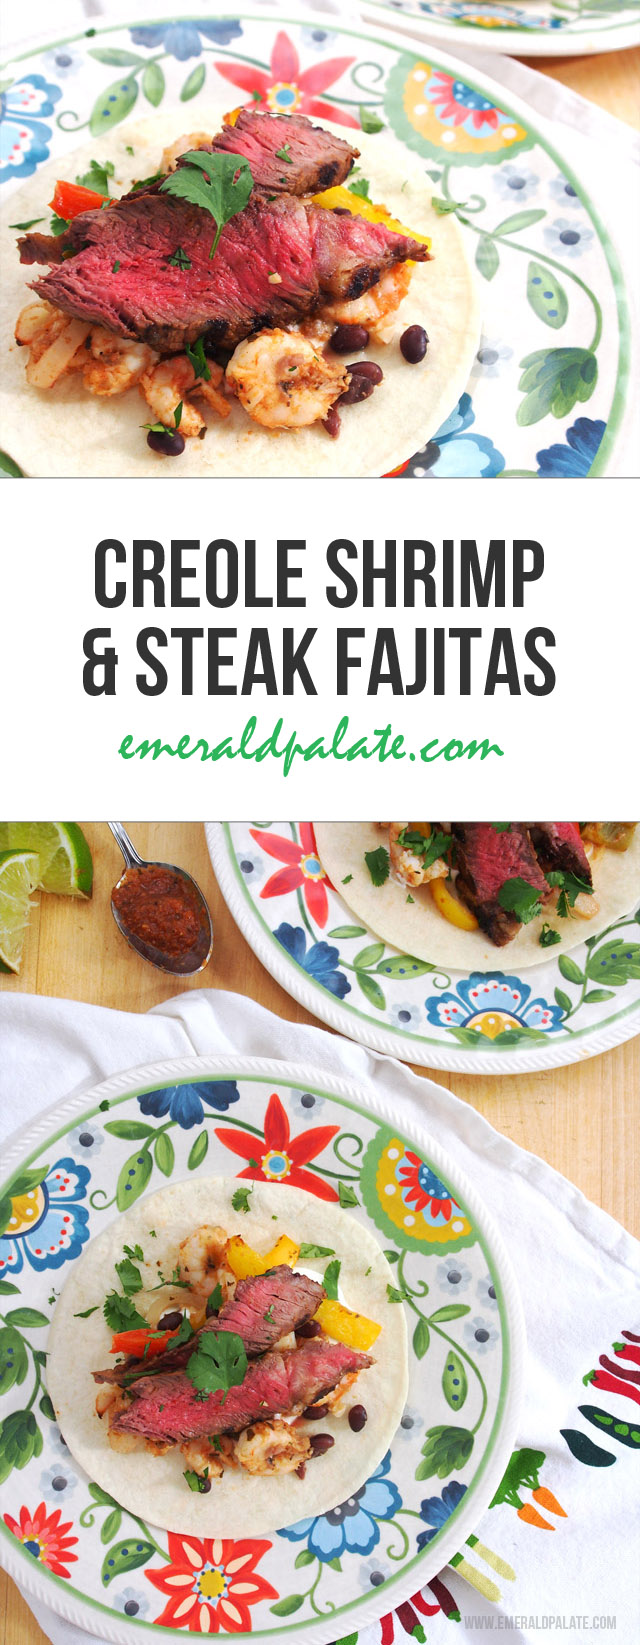 This shrimp and steak fajita recipe packs a punch of flavor with a creole-inspired sauce created by a local Pacific Northwest chef.